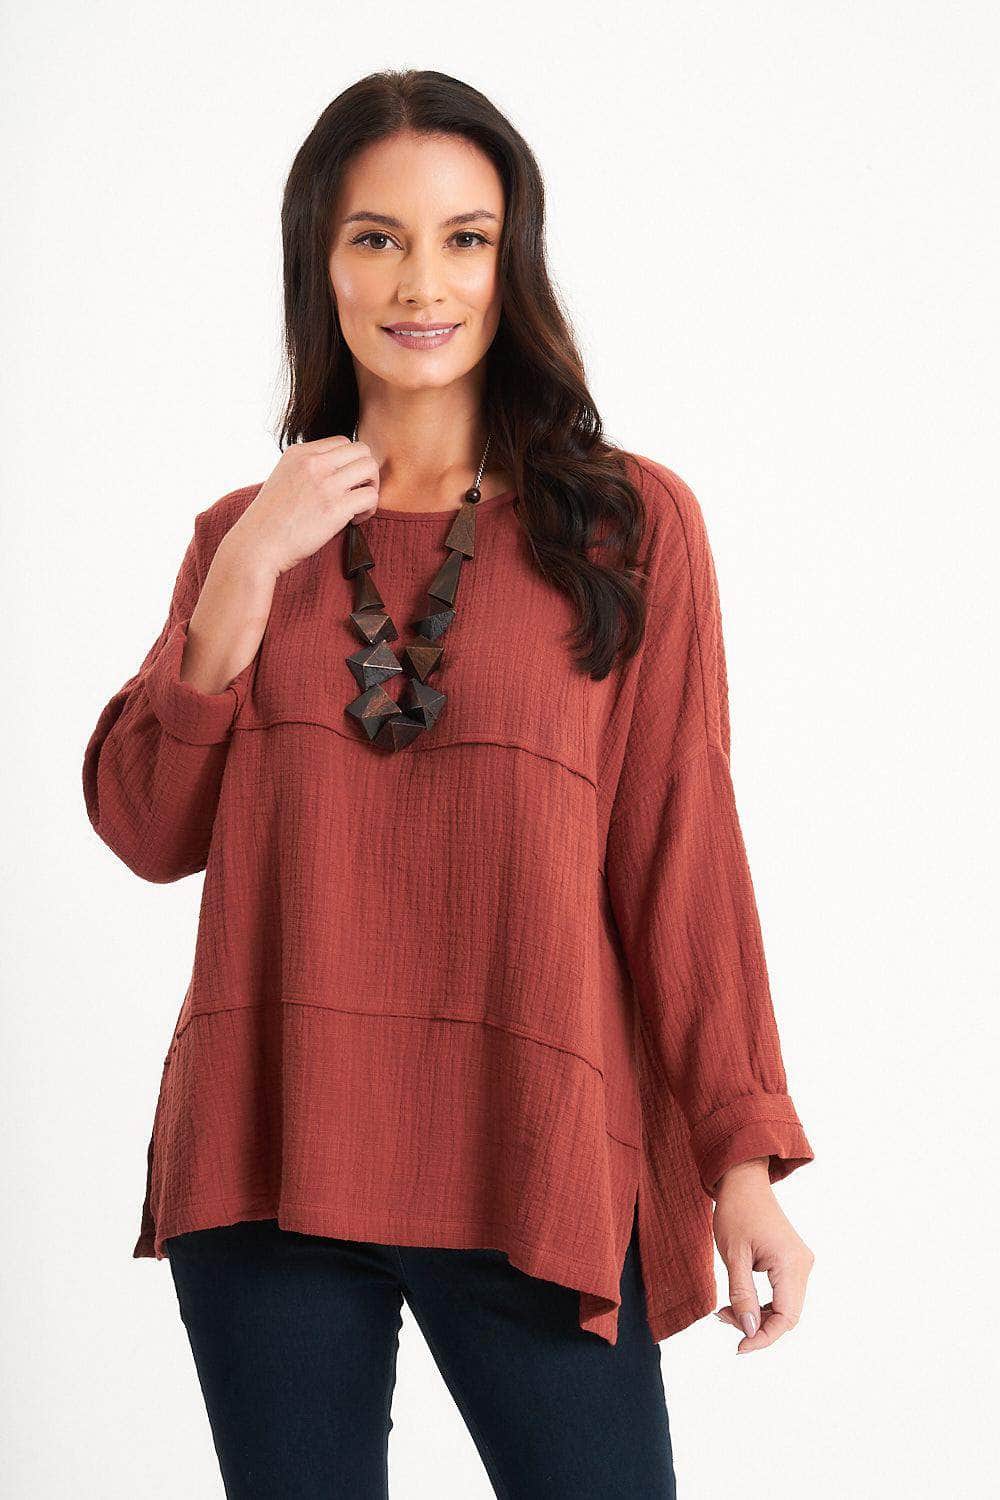 Saloos Relaxed Cotton Top